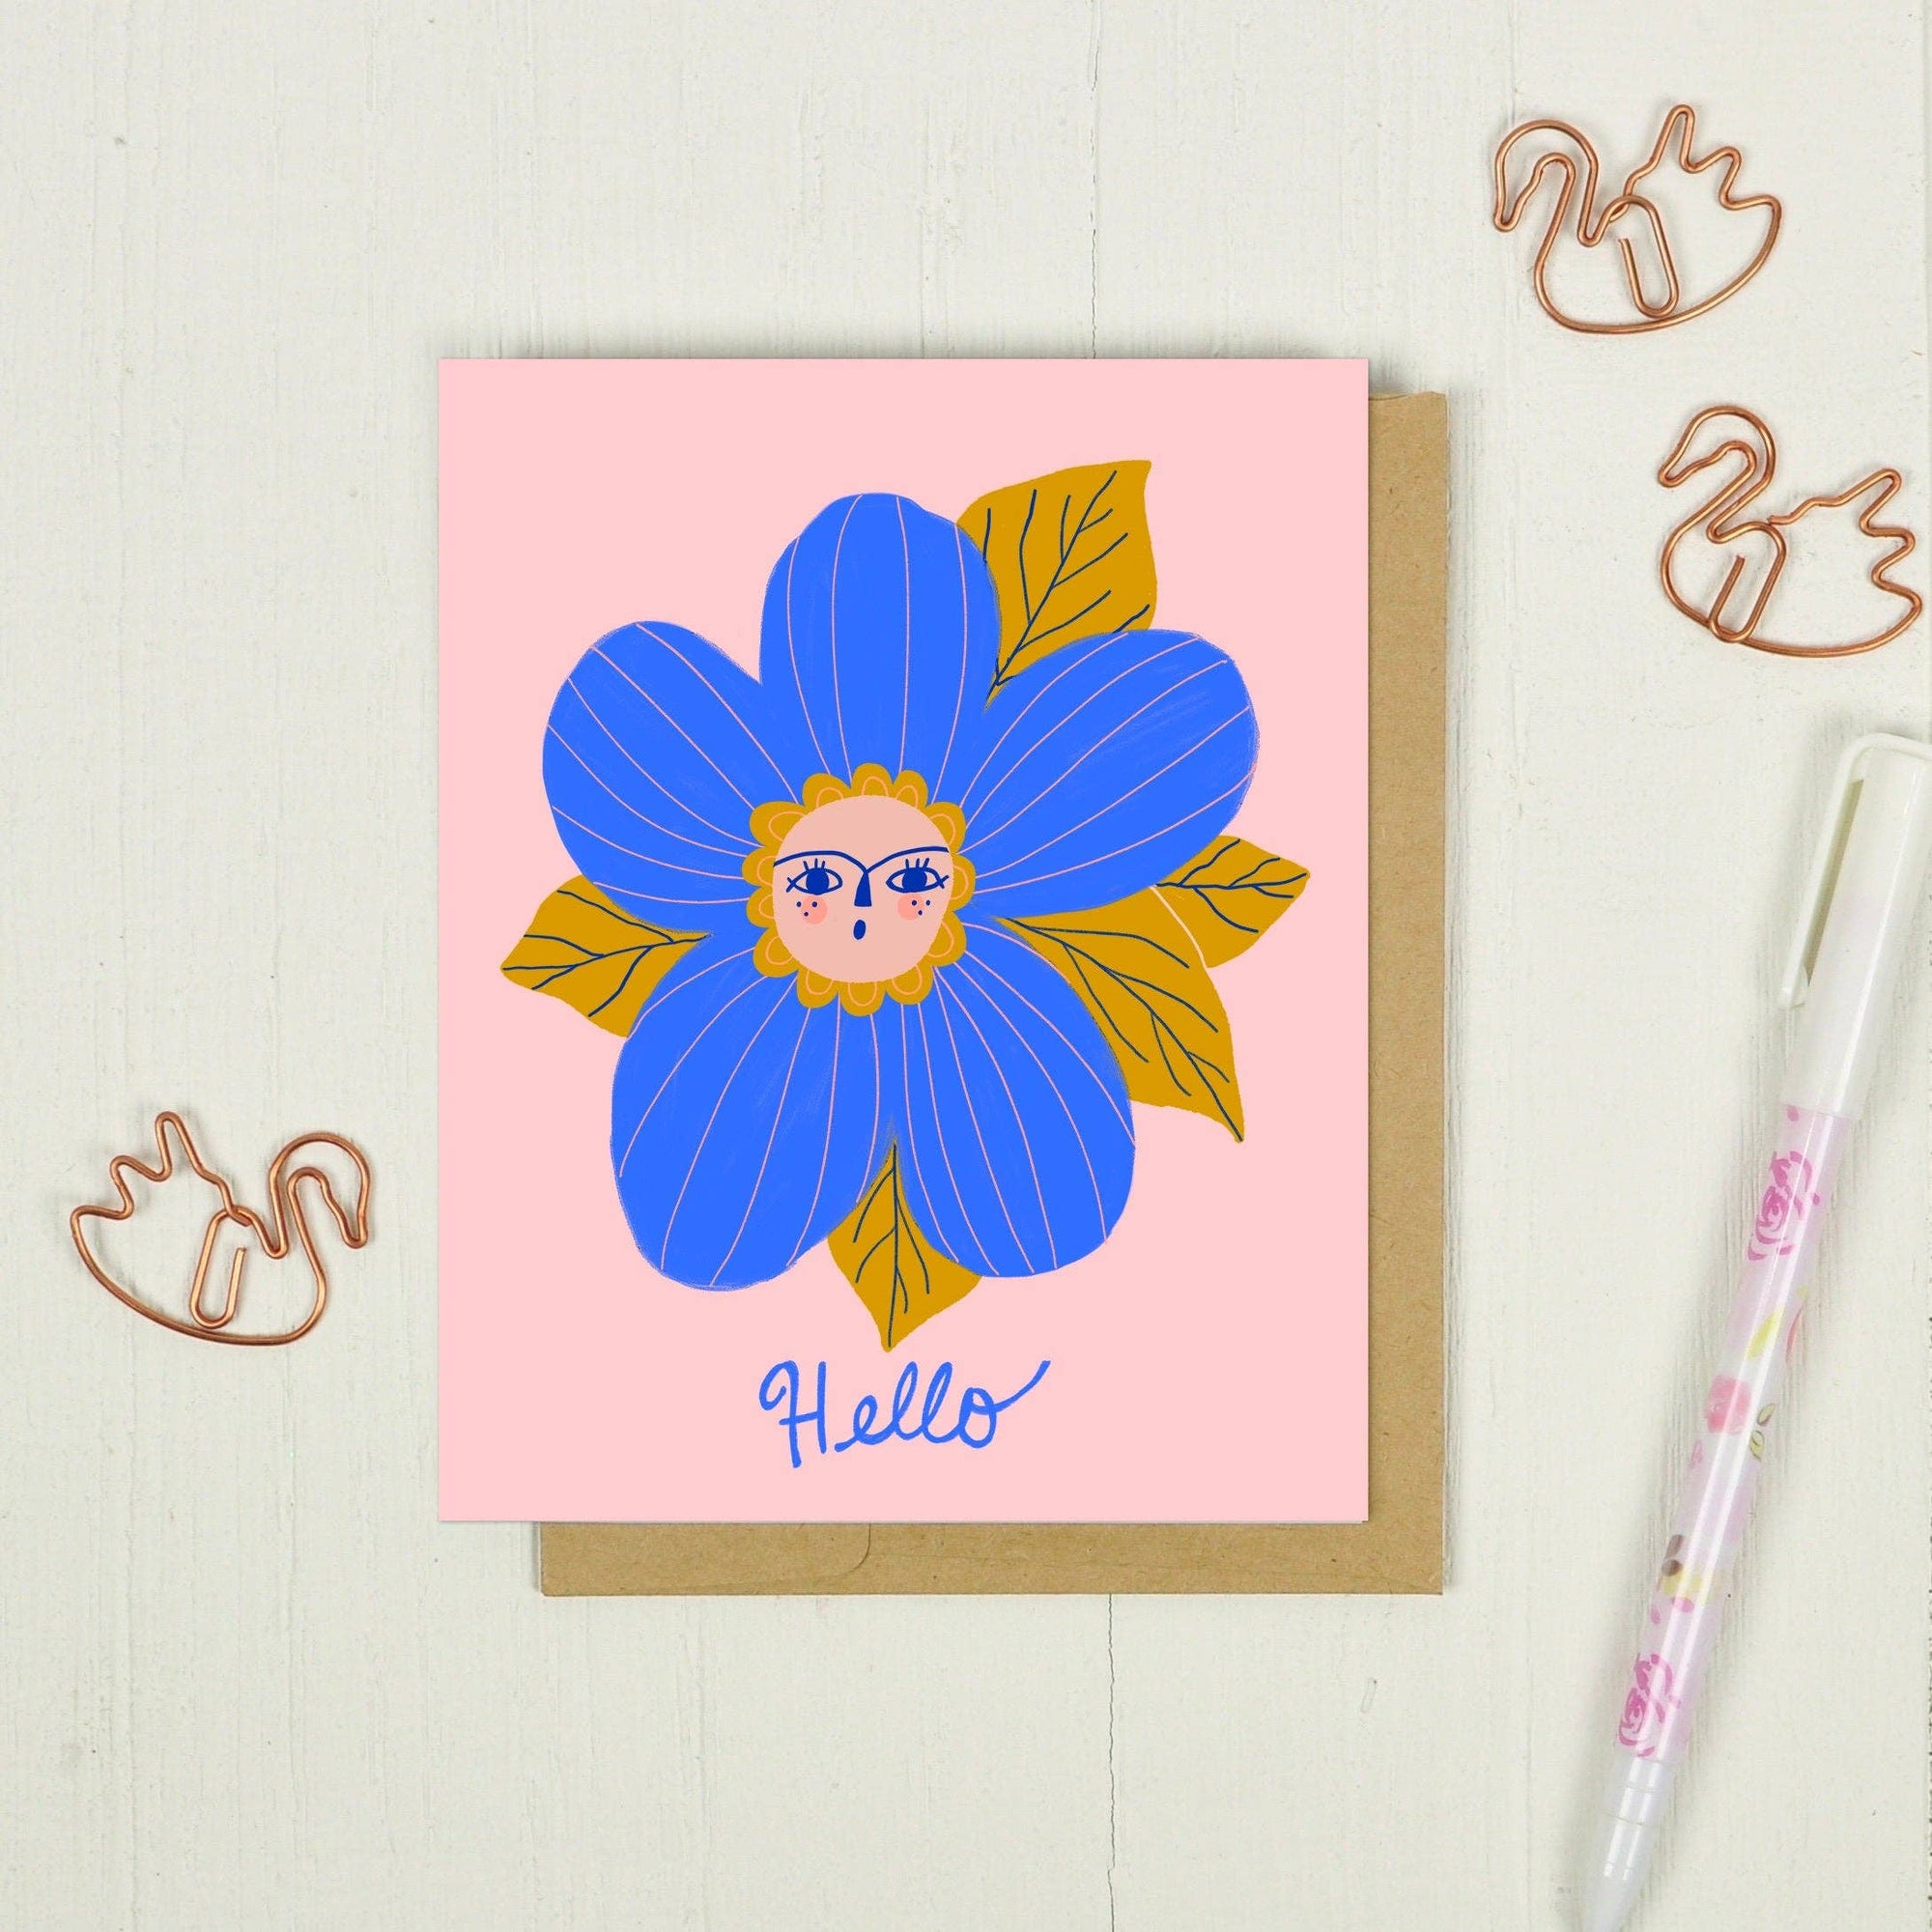 Hello Flower - Greeting Card: 4.25 x 5.5 inches